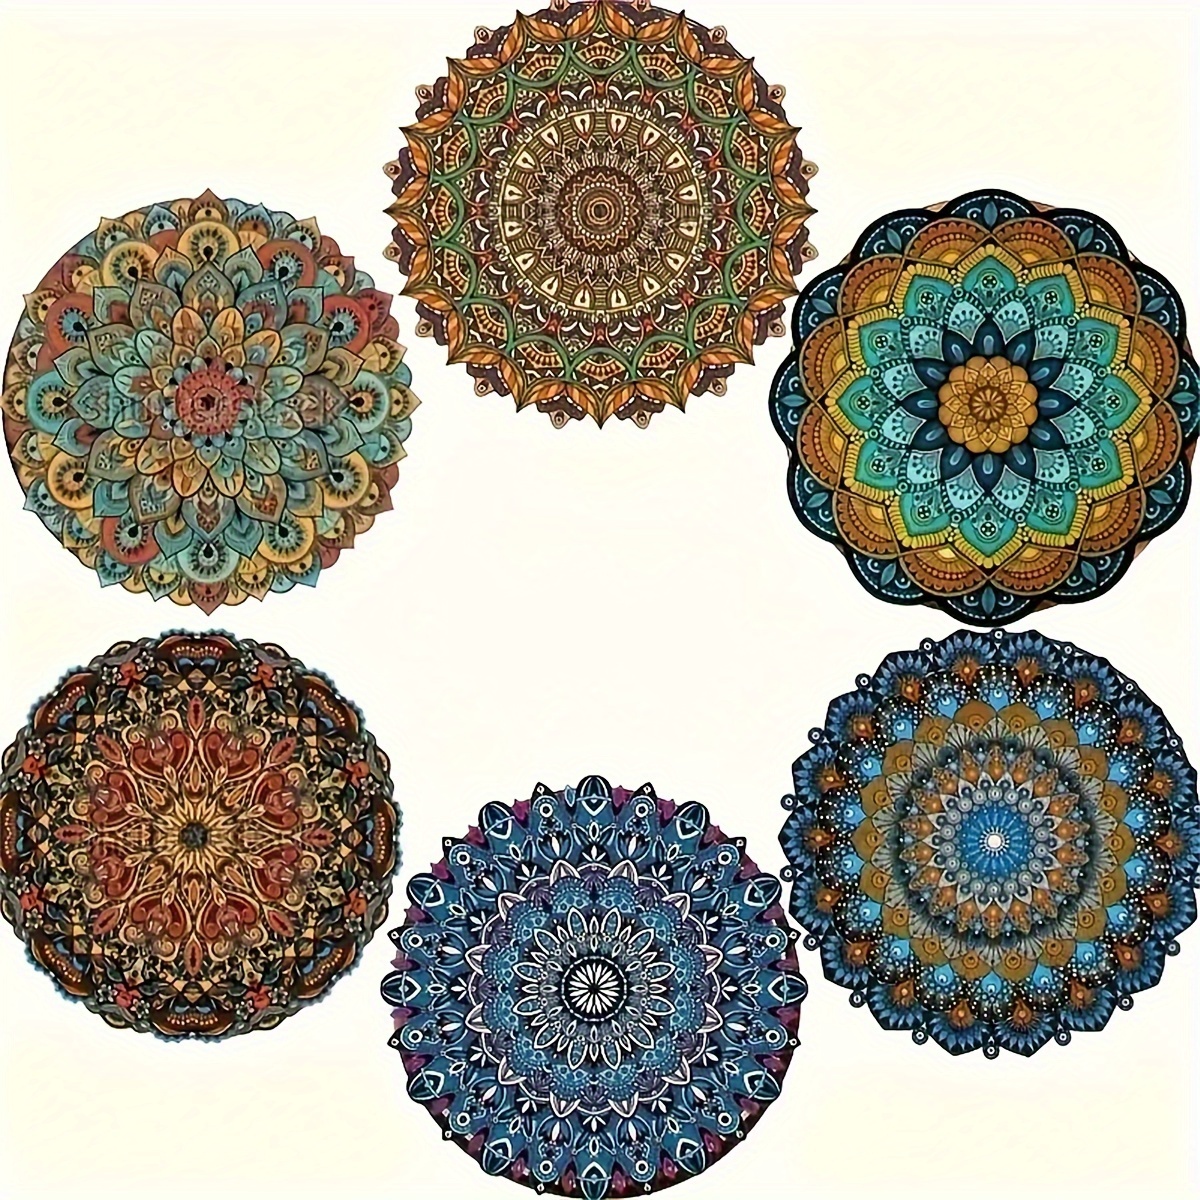 

6-piece Mandala Flower Wooden Coasters Set - Hand Washable, Heat-resistant Table Mats With Non-slip Design For Drinks - Ideal For Christmas, Home & Office Decor, Theme Parties